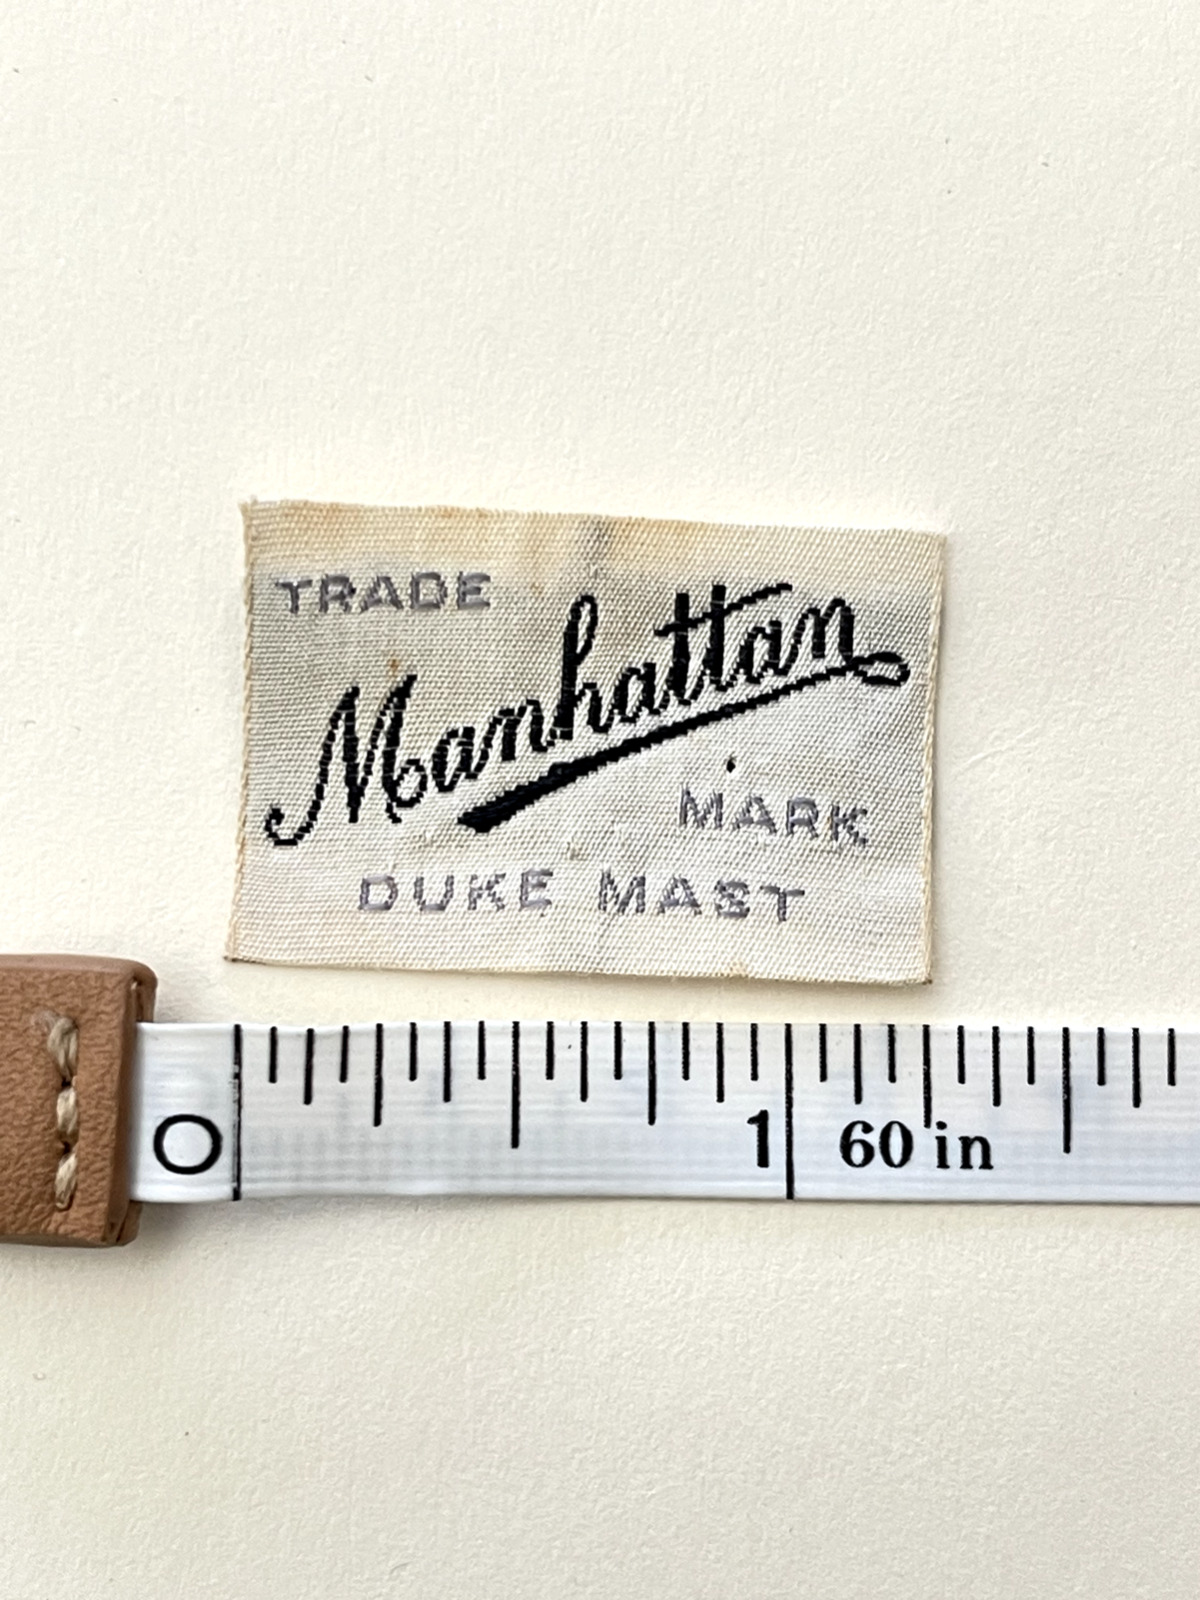 Vintage dead stock labels adorable Manhattan label with script and type fonts